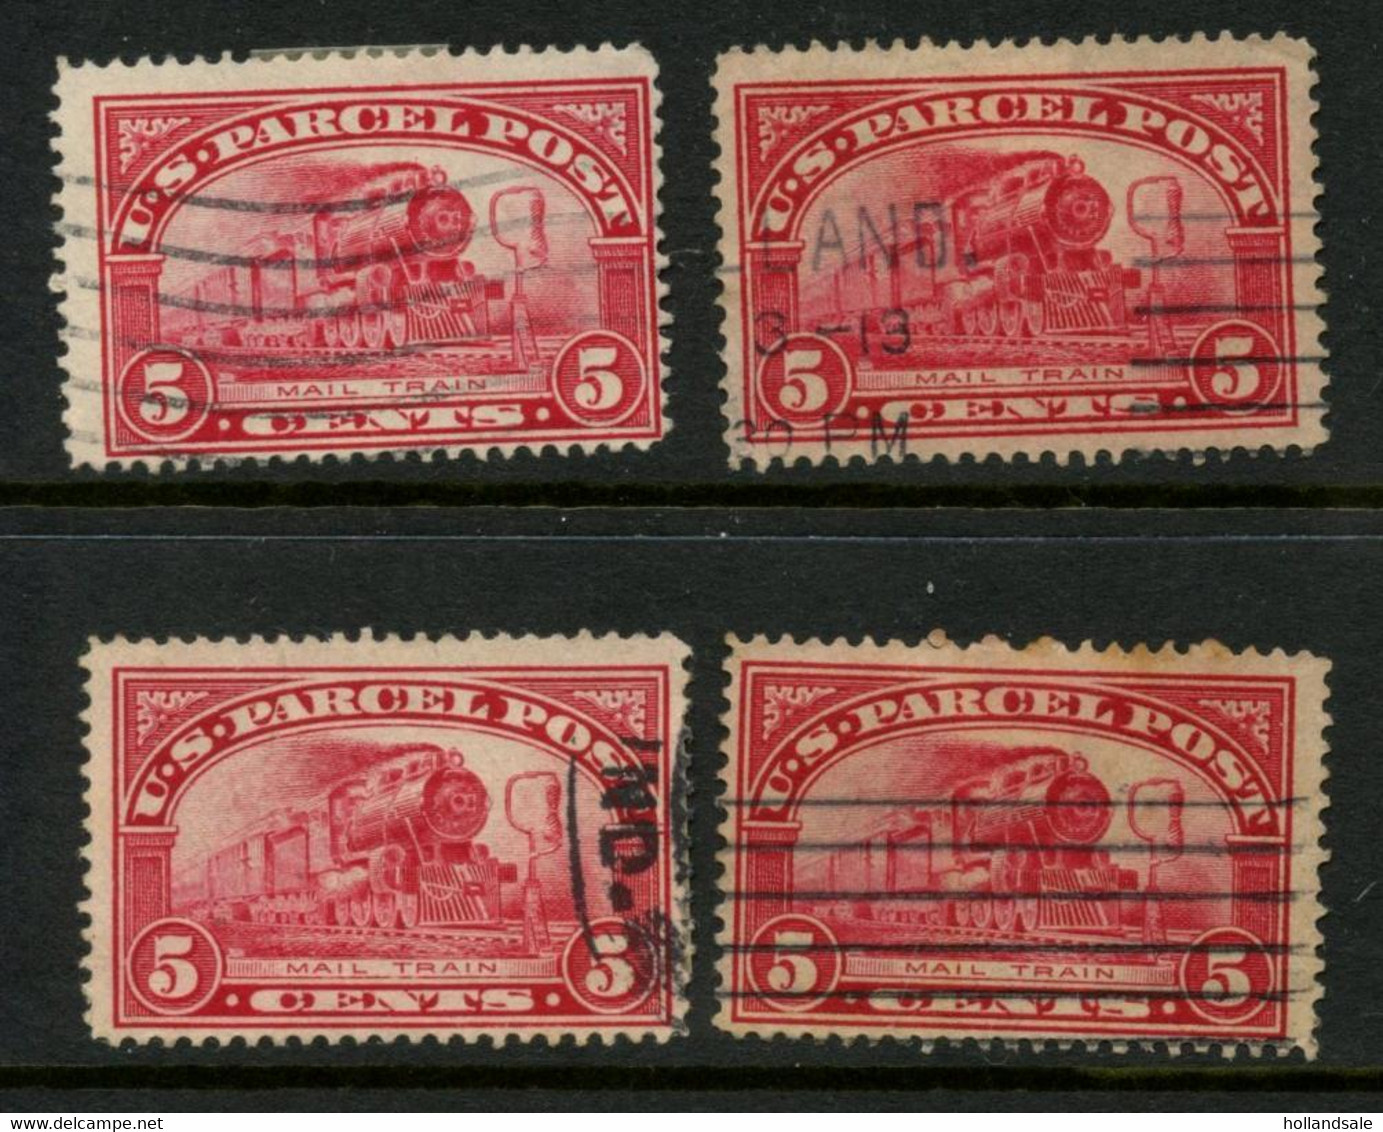 U.S.A. - 1913  5c Parcel Post Stamps. Five (5) Stamps. Used. SCOTT # PP5. - Colis